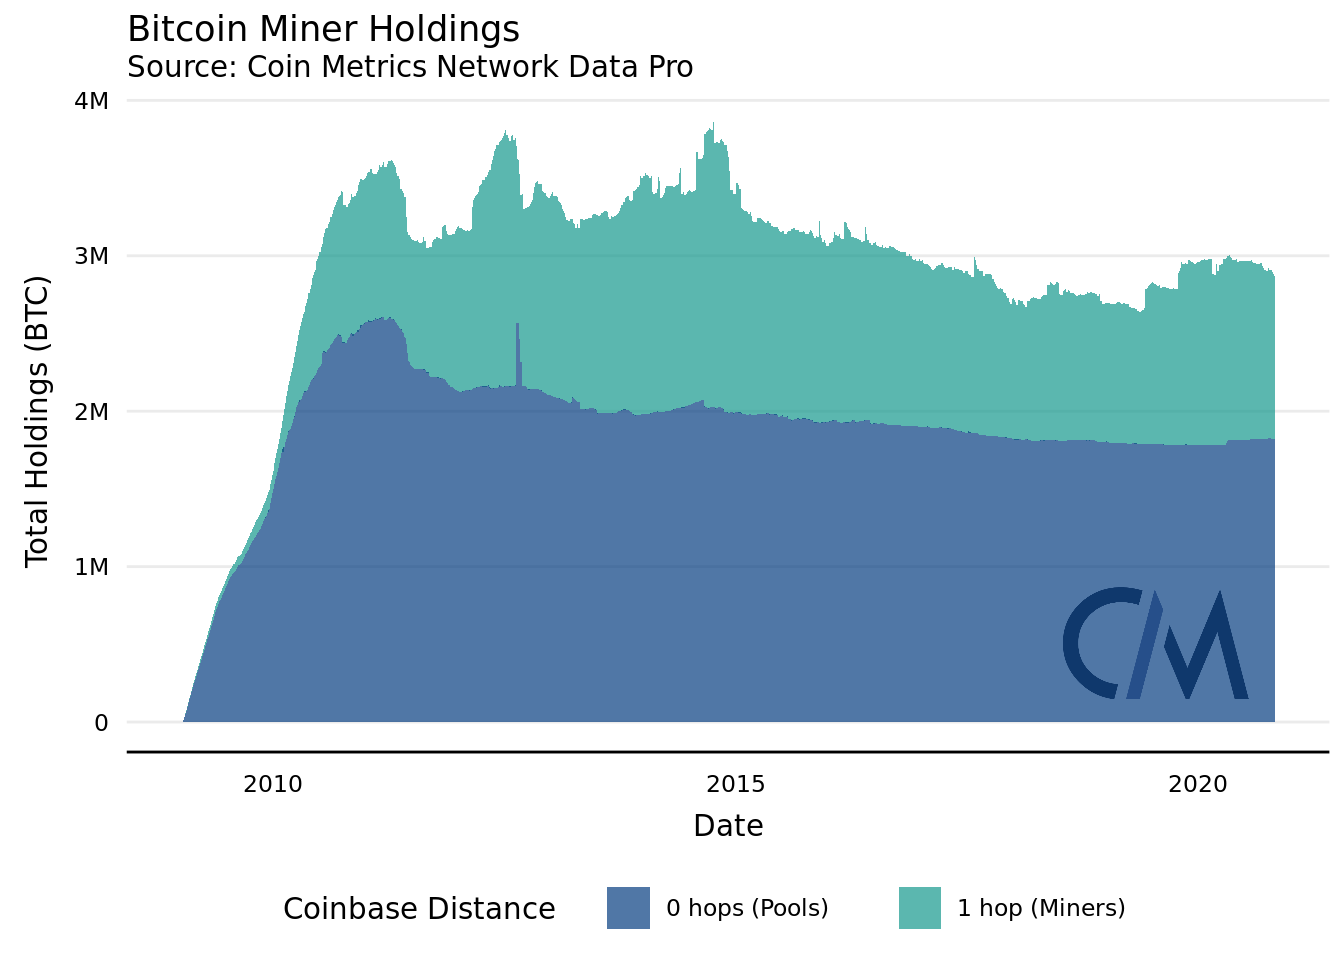 Why Are Bitcoin Miners Liquidating Their Holdings? - PayBitoPro